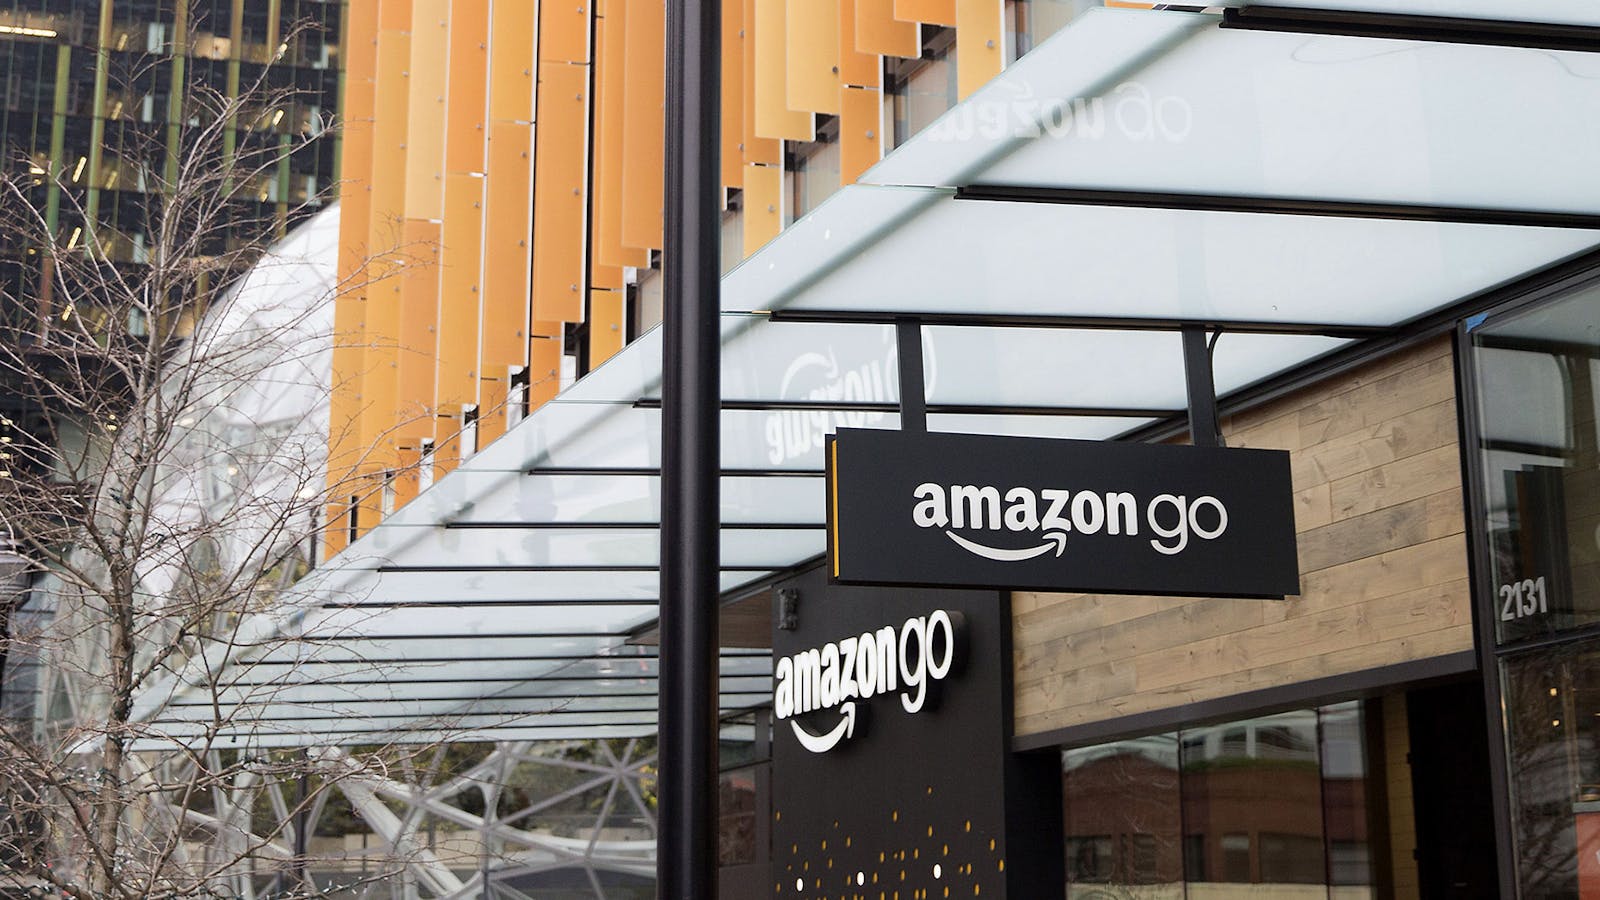 An Amazon Go store in Seattle. Photo by Bloomberg